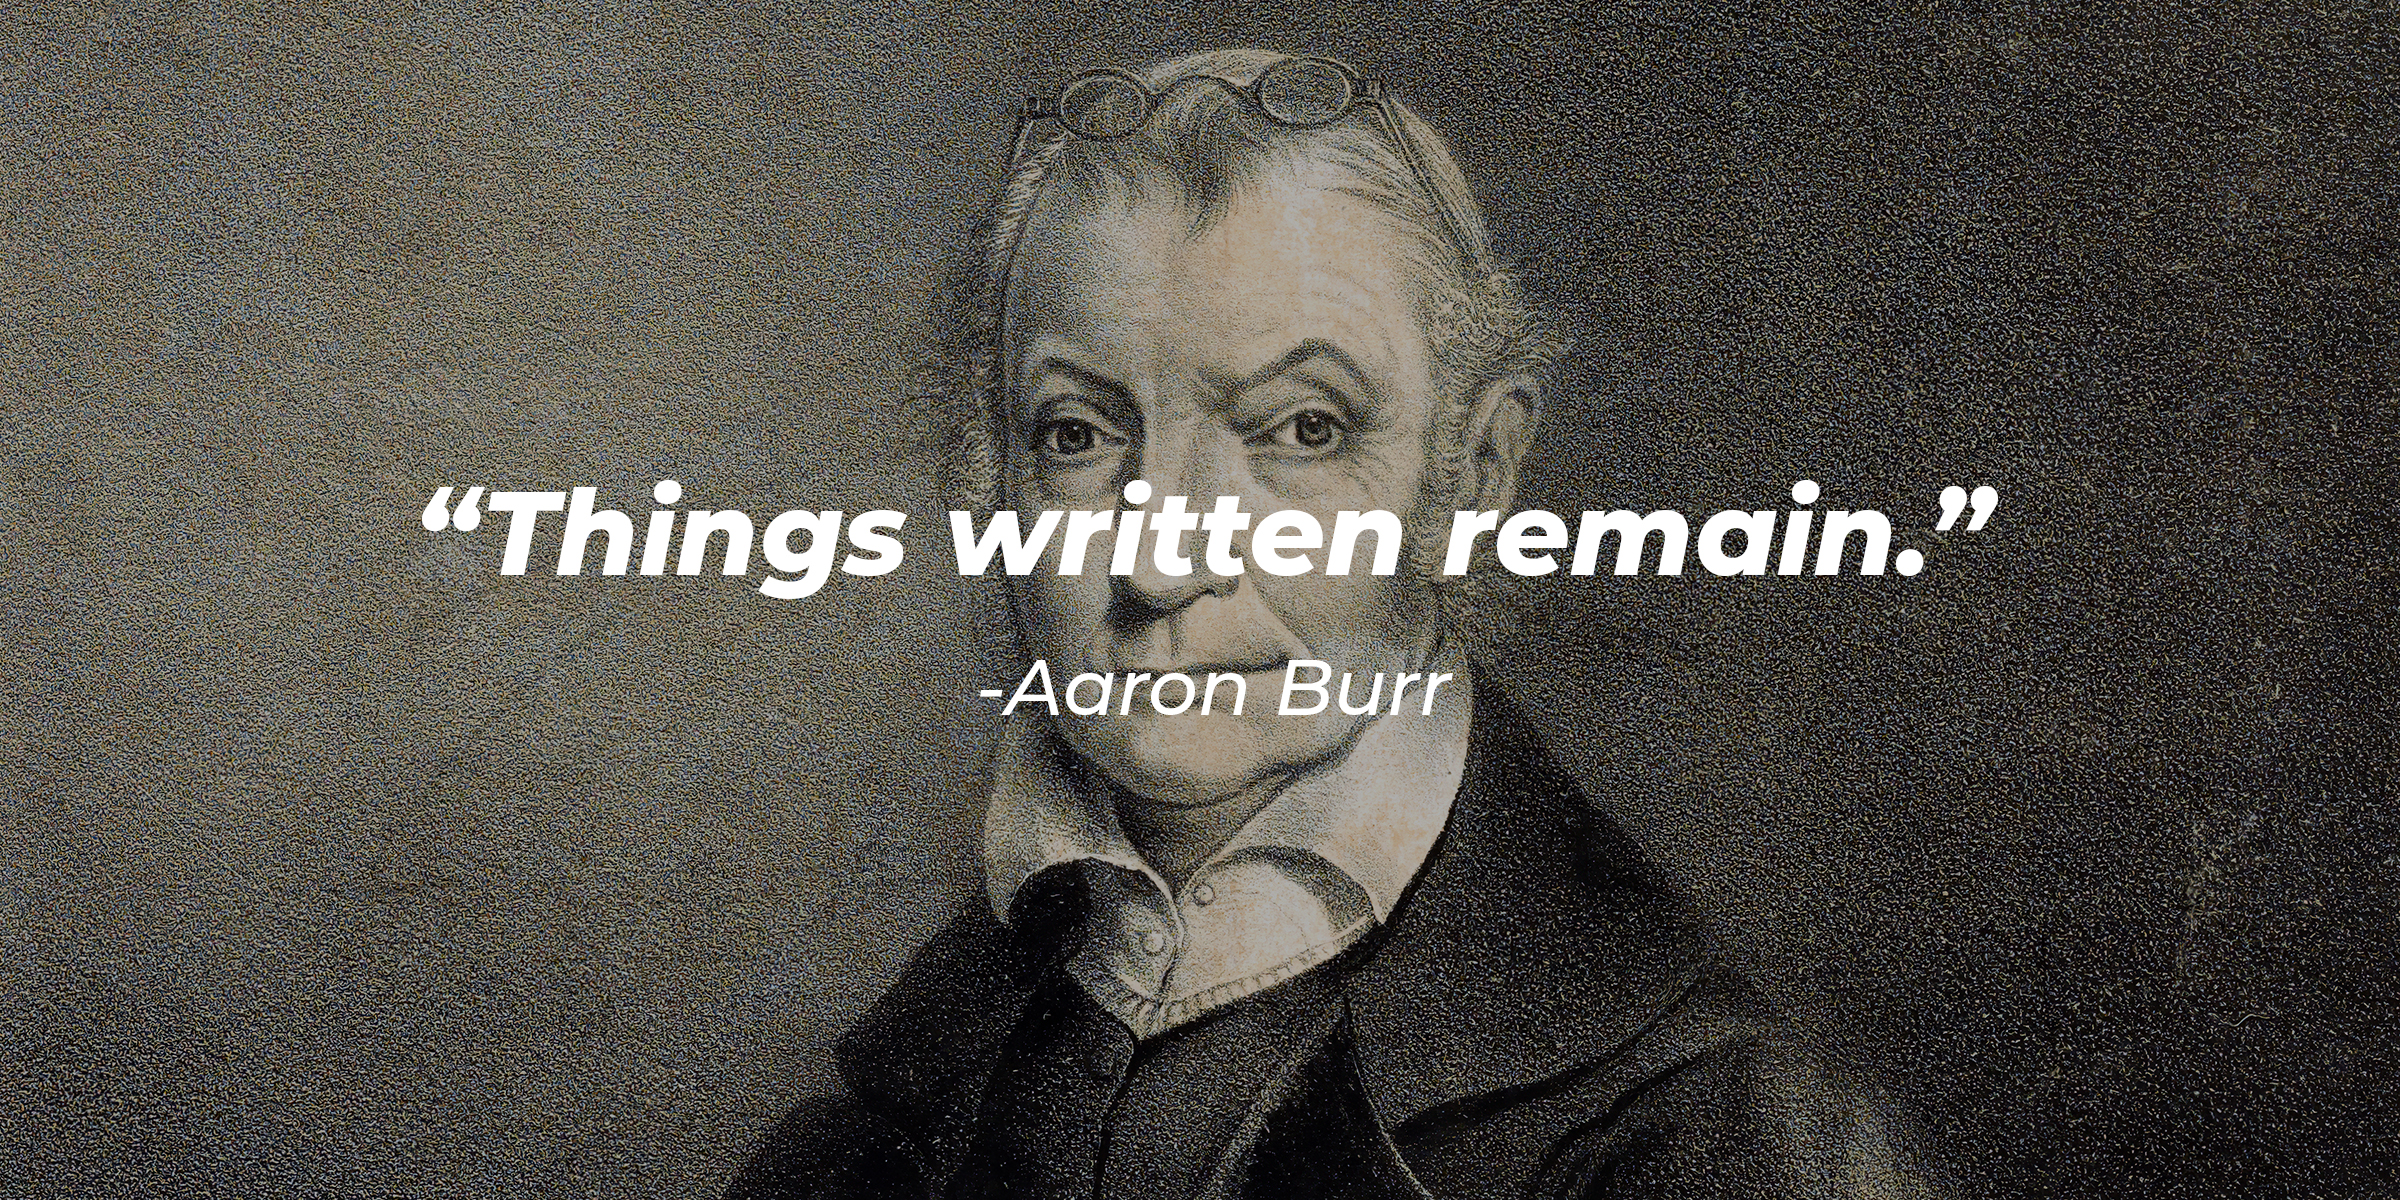 Aaron Burr's image with his quote: "Things written remain." | Source: Getty Images